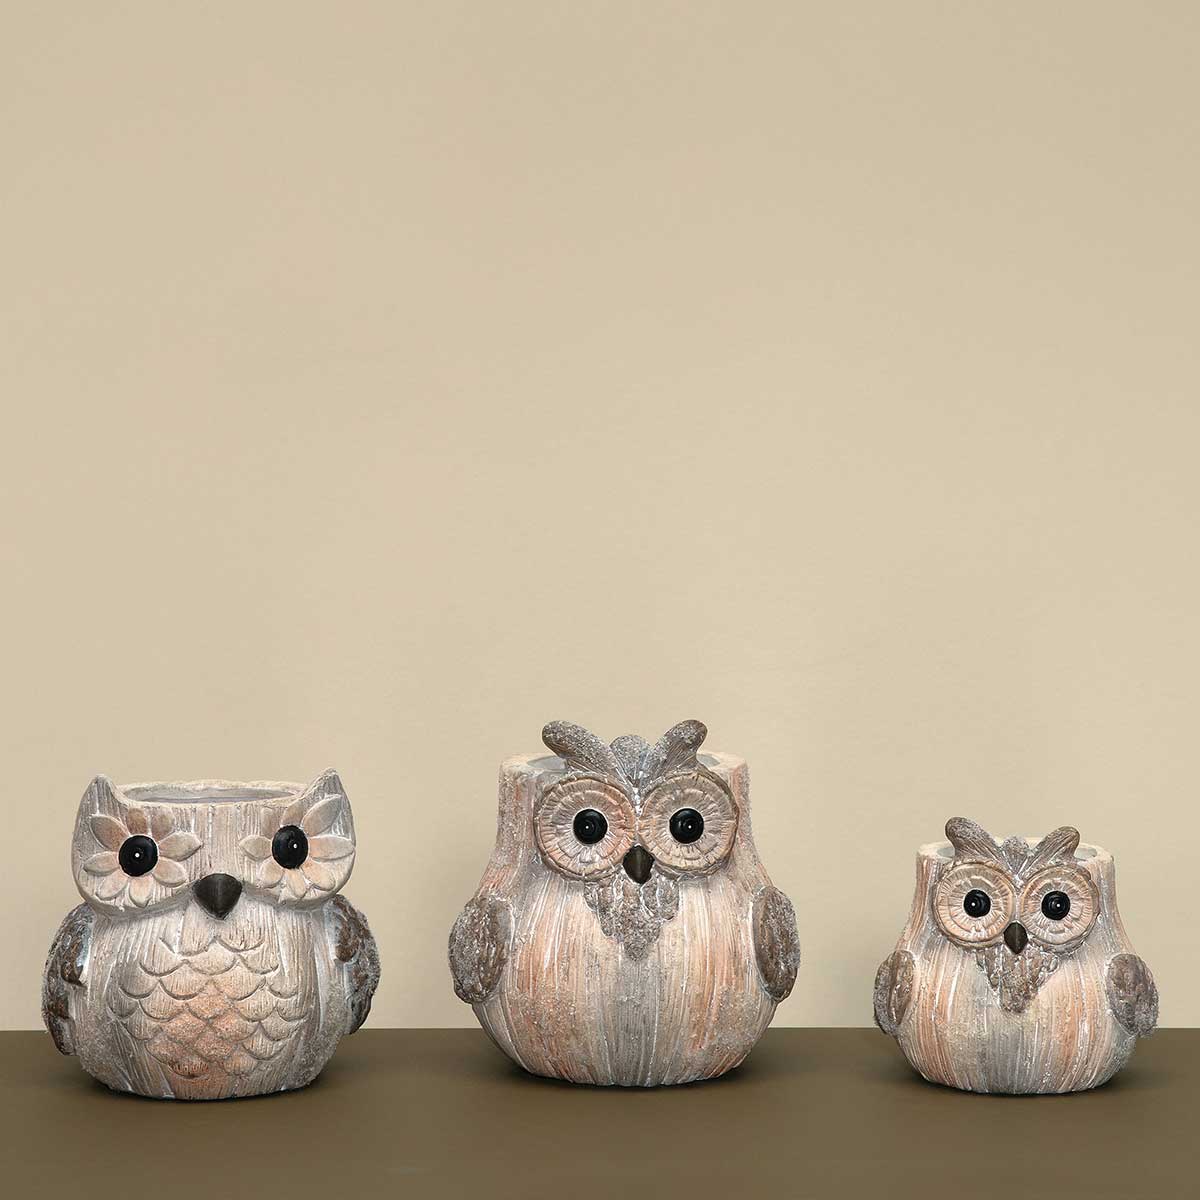 OLLIE FROSTED CERAMIC OWL POT CREAM/BROWN WITH MICA SM